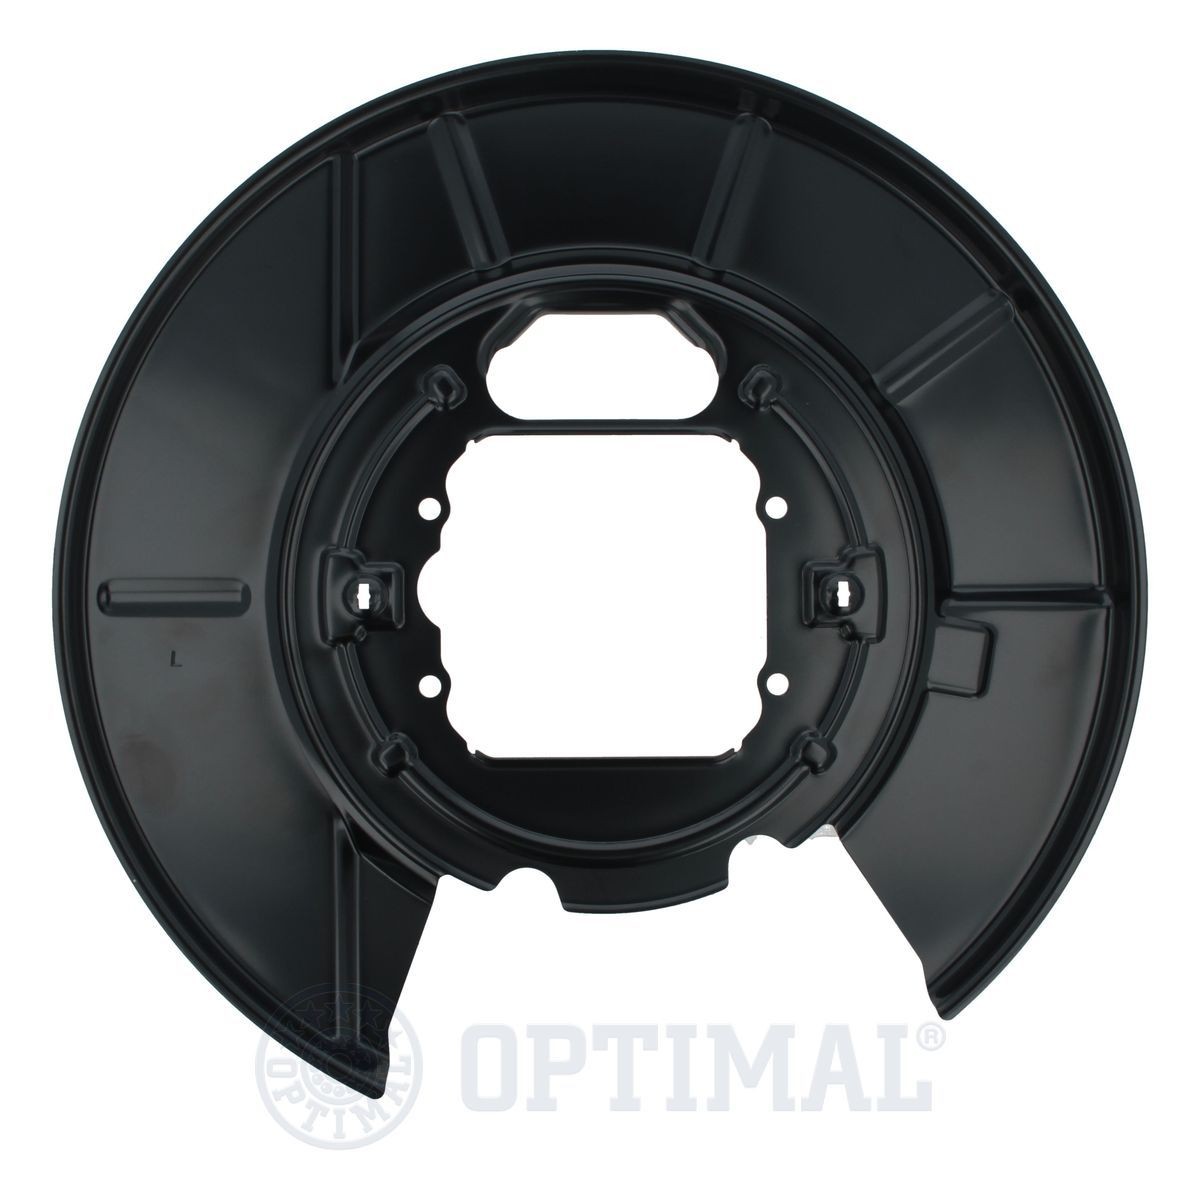 OPTIMAL Rear Brake Disc Cover Plate BSP-5022L for BMW X5 E53